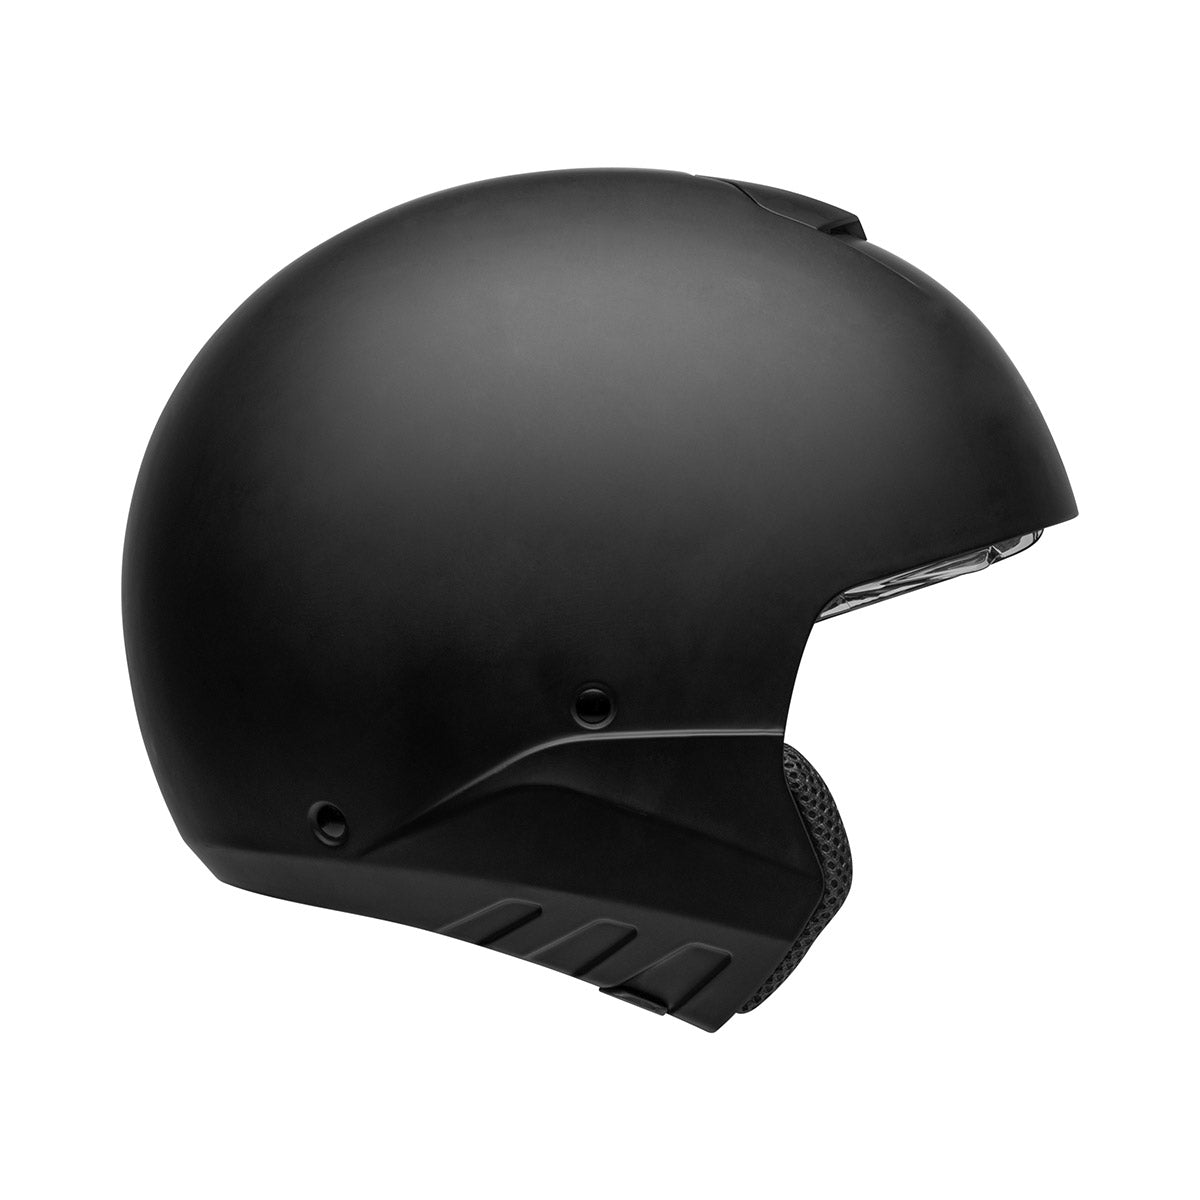 Bell Broozer ‘Full Face. Open Face. In Your Face’ 2 in 1 Motorcycle Matte Black Helmet